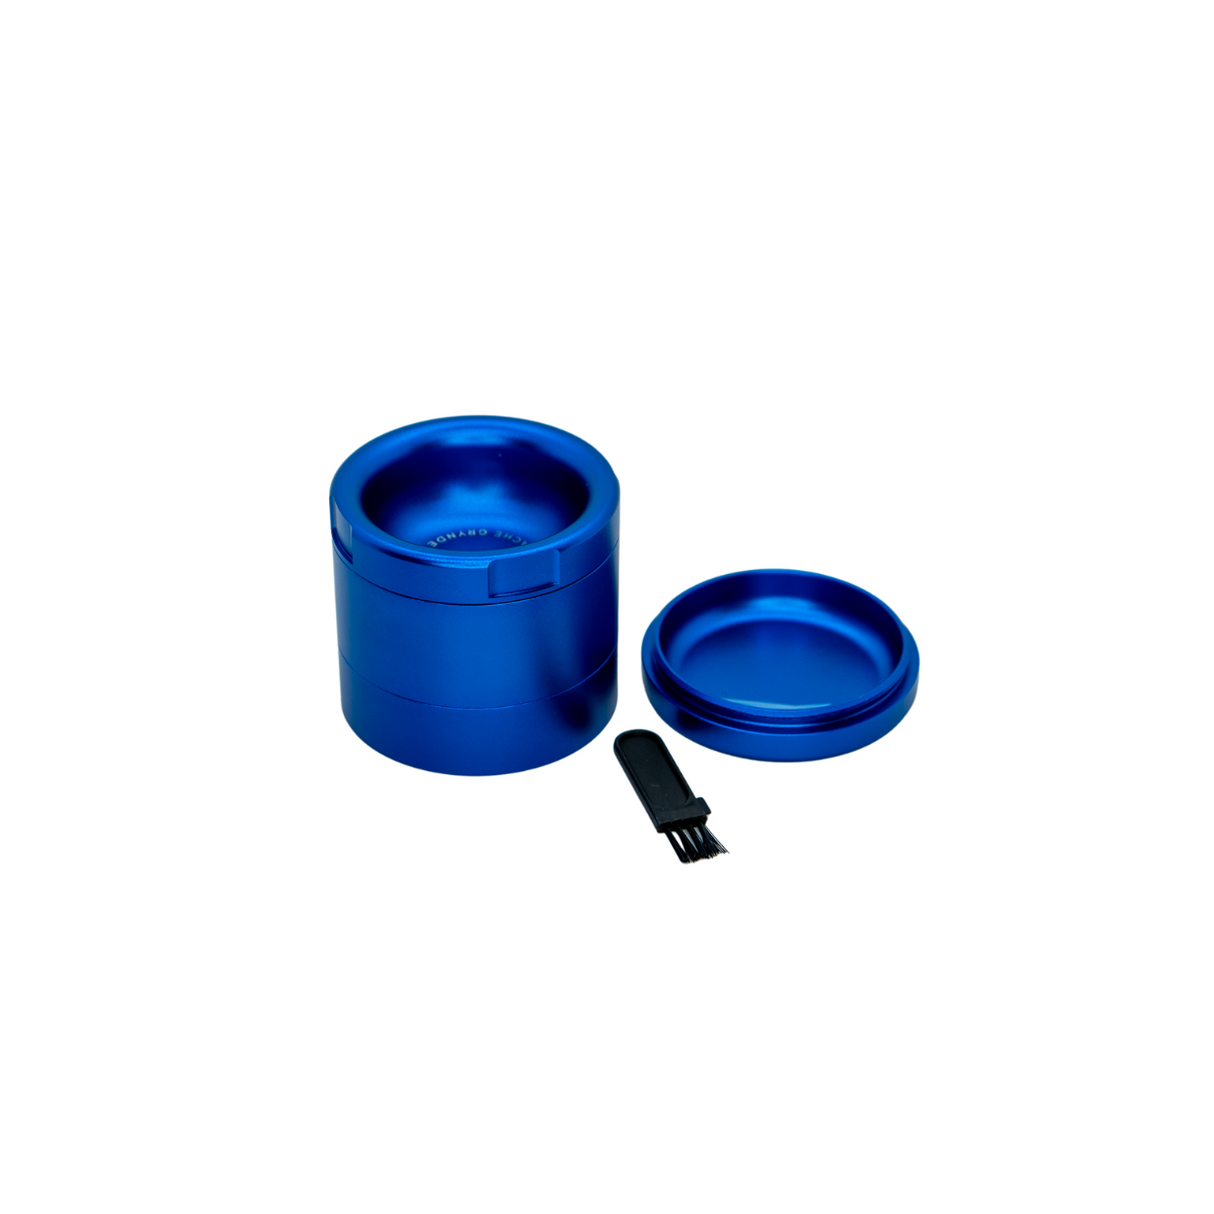 Stacheproductswholesale Grynder (N.Y.A.G) 4 Piece in blue, top view with magnetic lid and scraper